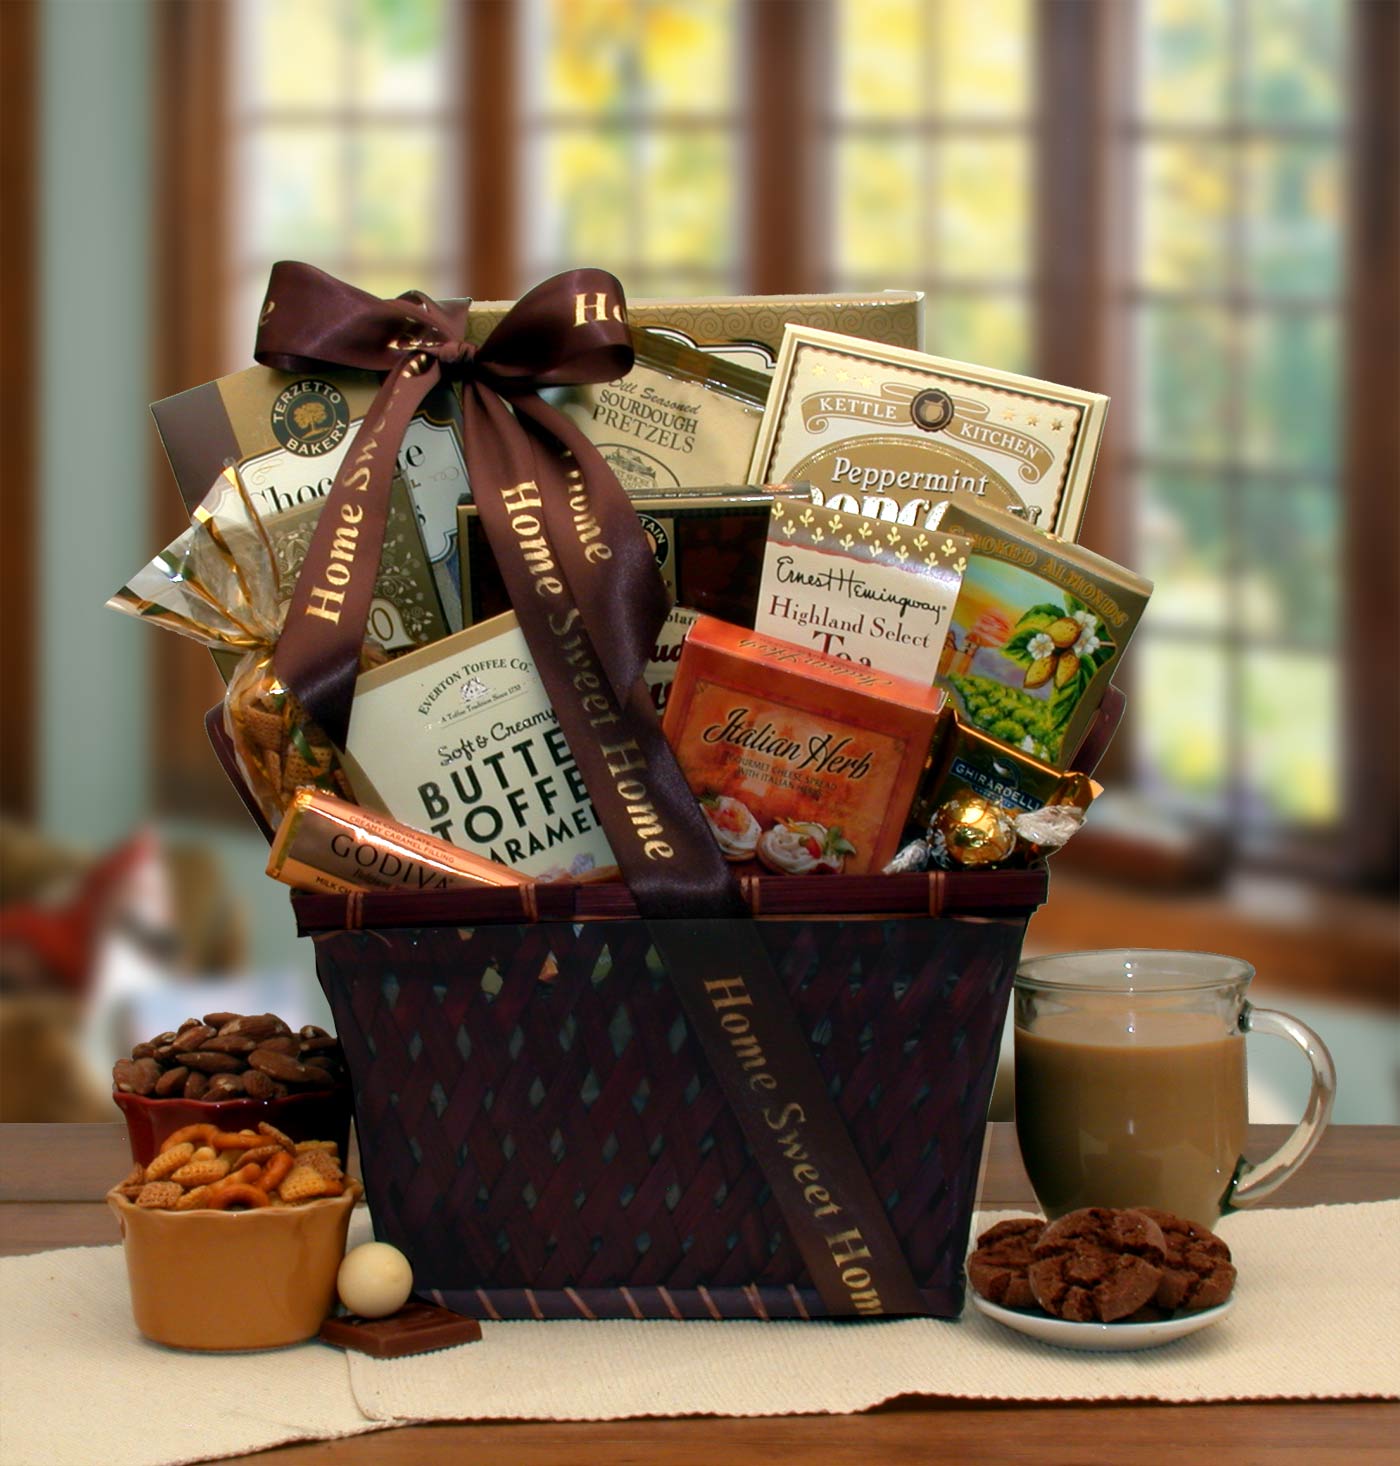 Home Is Where The Heart Is Housewarming Gift Basket- housewarming gift baskets - welcome basket